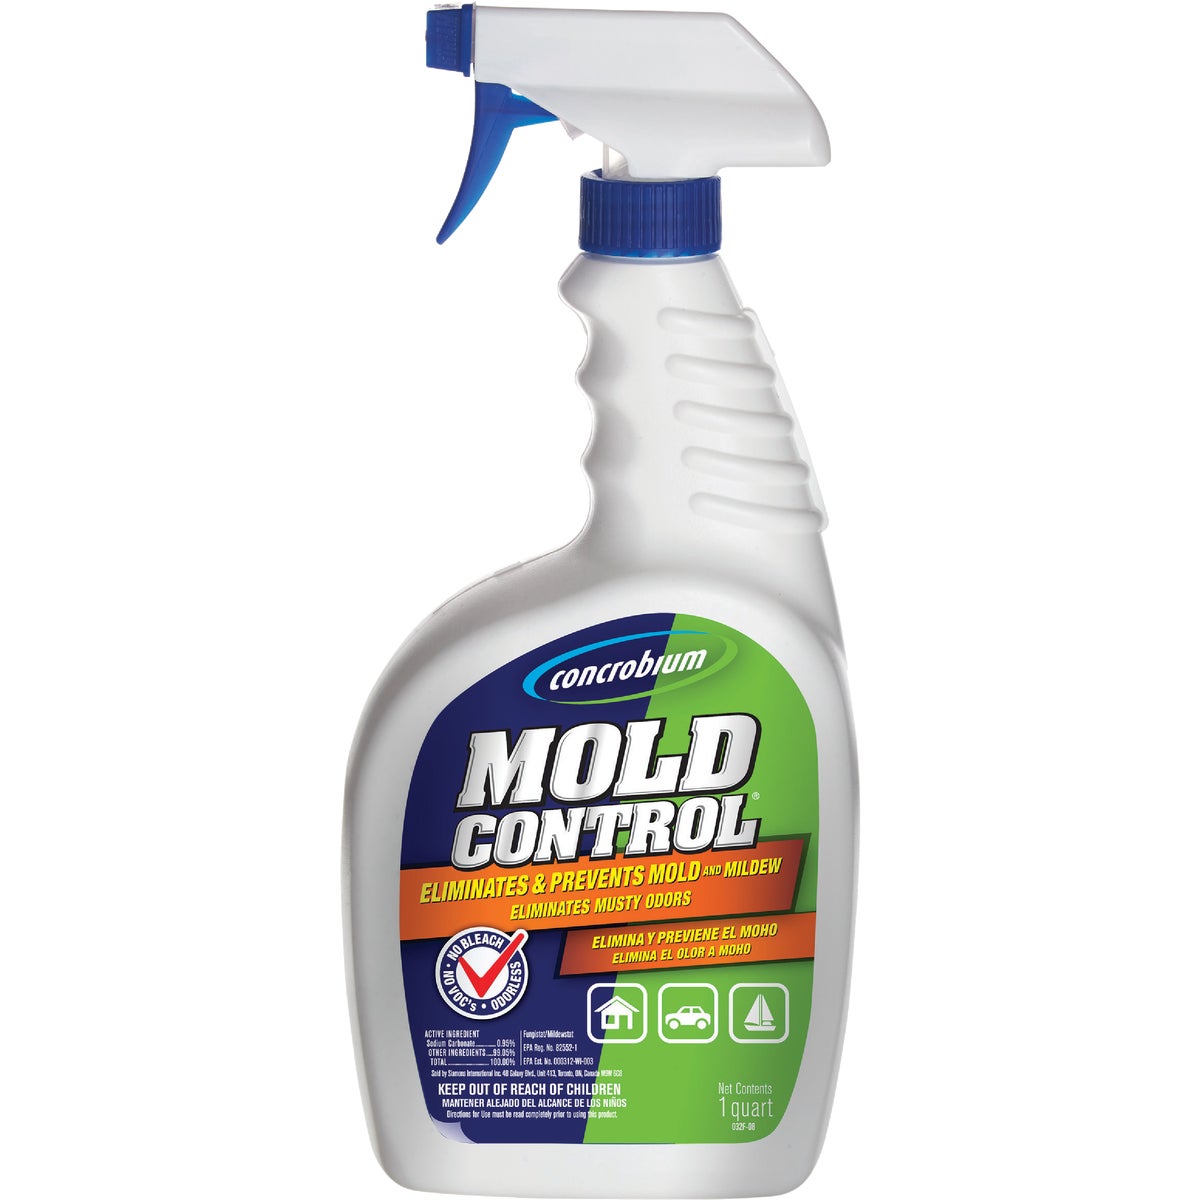 Item 600102, Odorless and colorless Concrobium Mold Control eliminates existing mold 